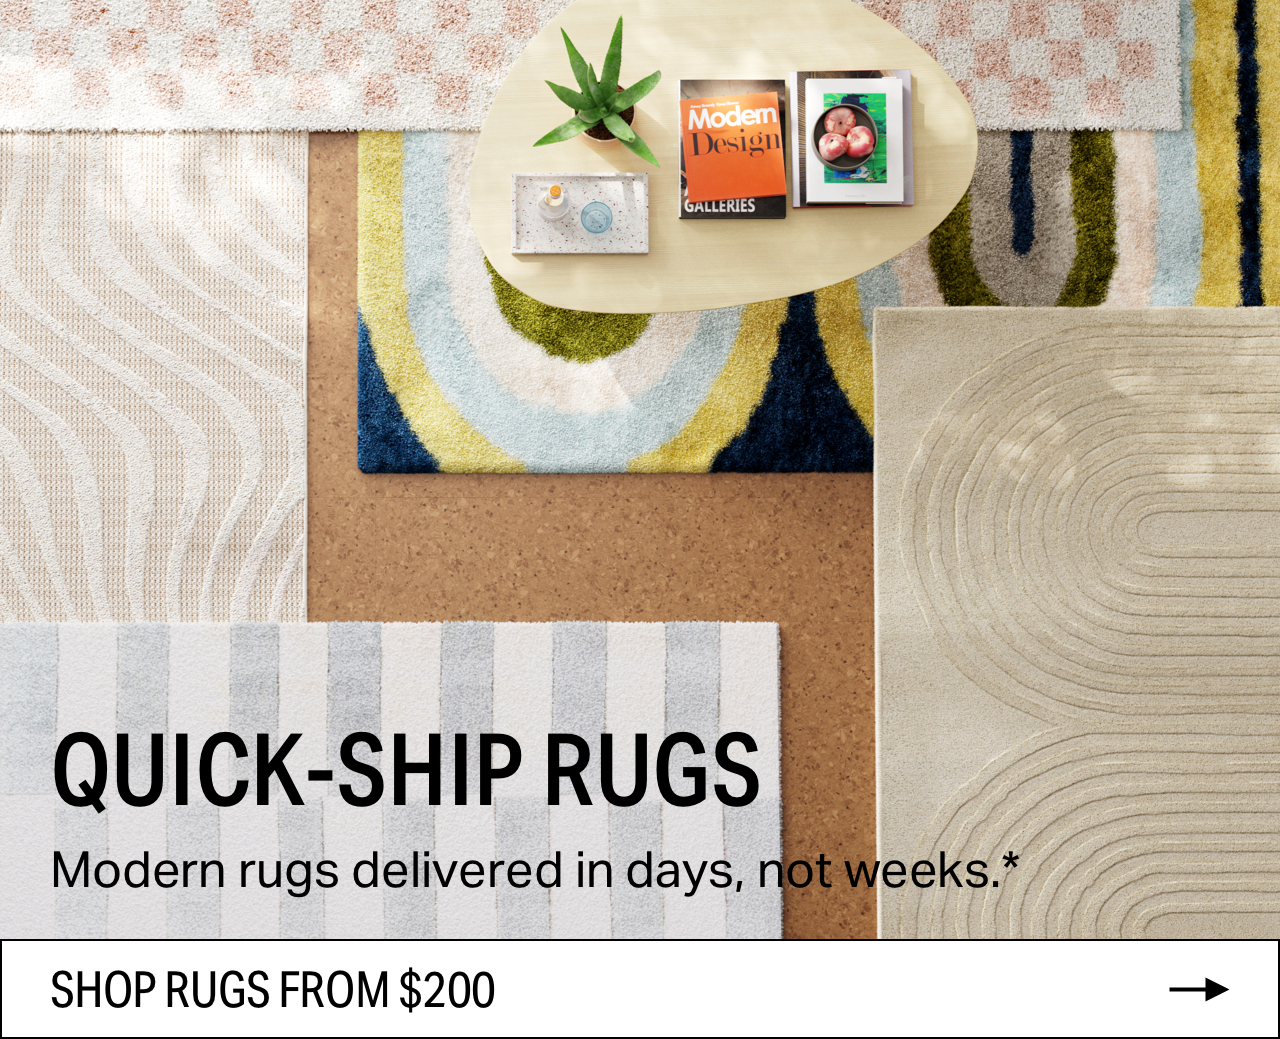  QUICK-SHIP RUGS Modern rugs delivered in days, SHOP RUGS FROM $200 